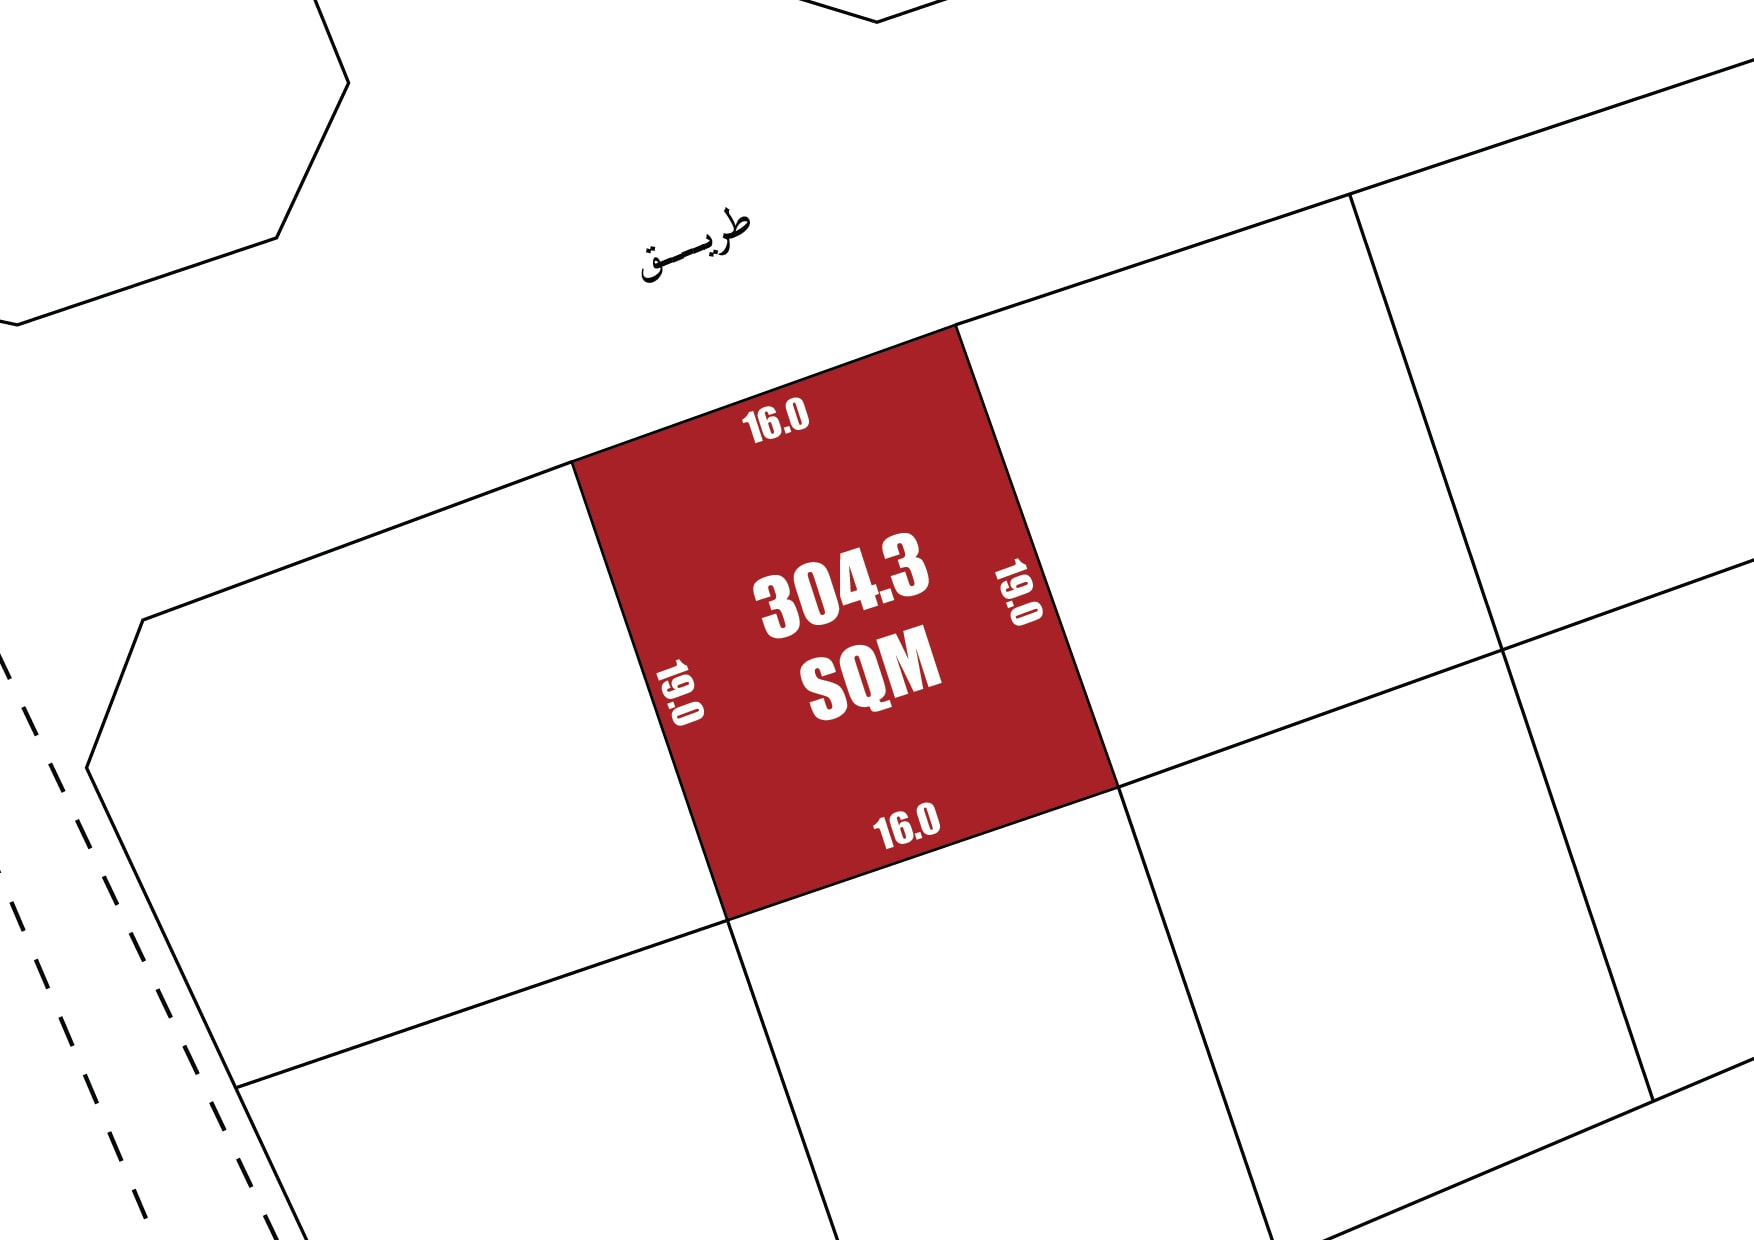 RB Land for Sale in Busaiteen